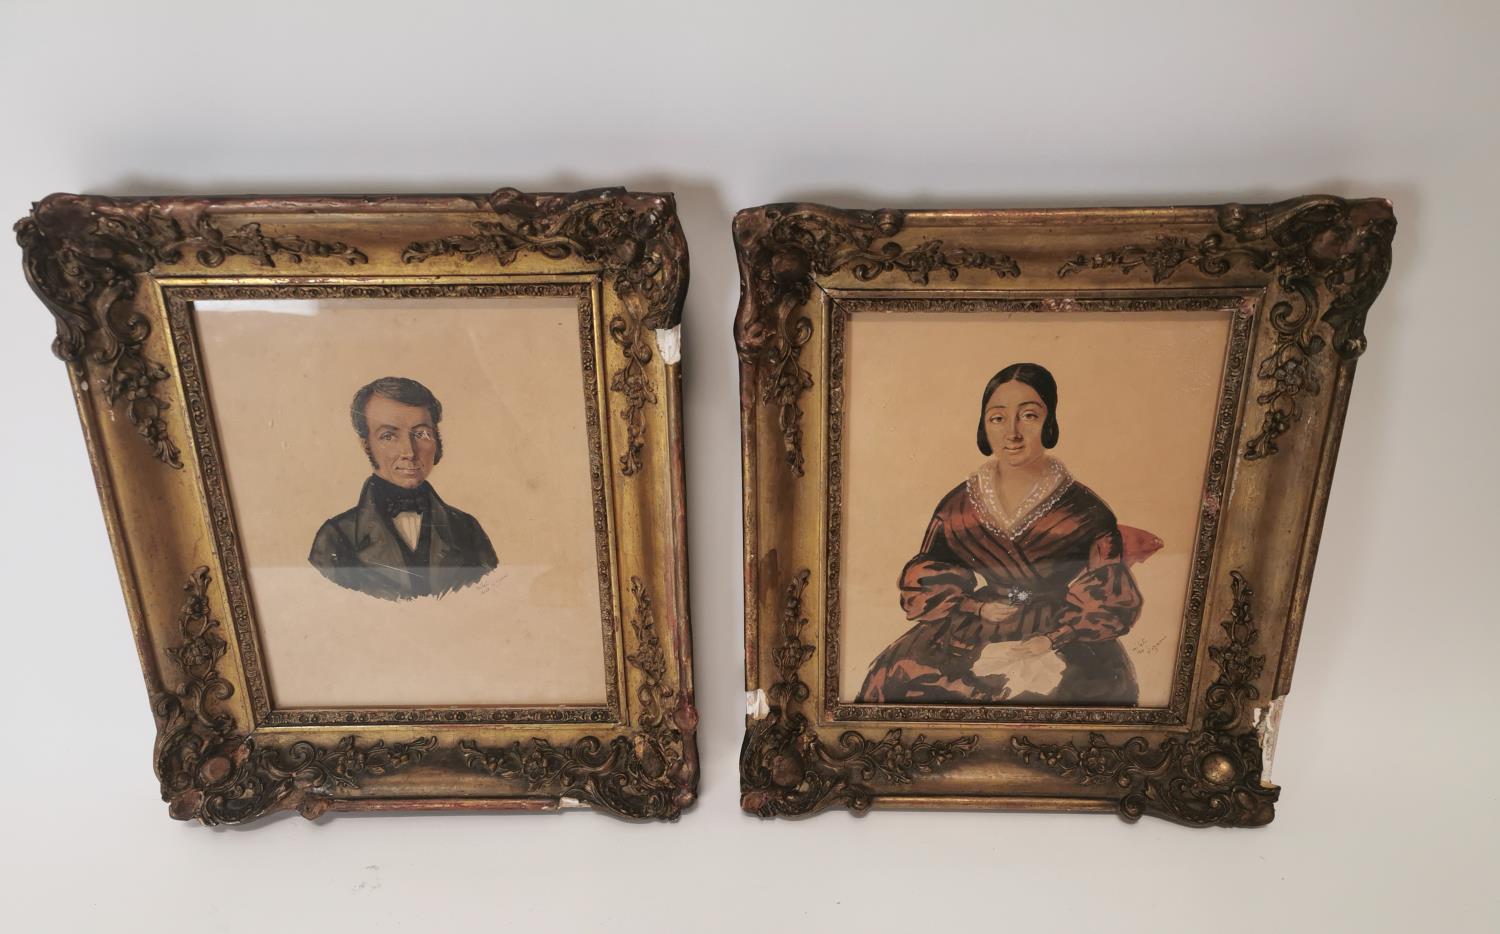 Pair of 19th C. watercolours in decorative giltwood frames of Husband and Wife.